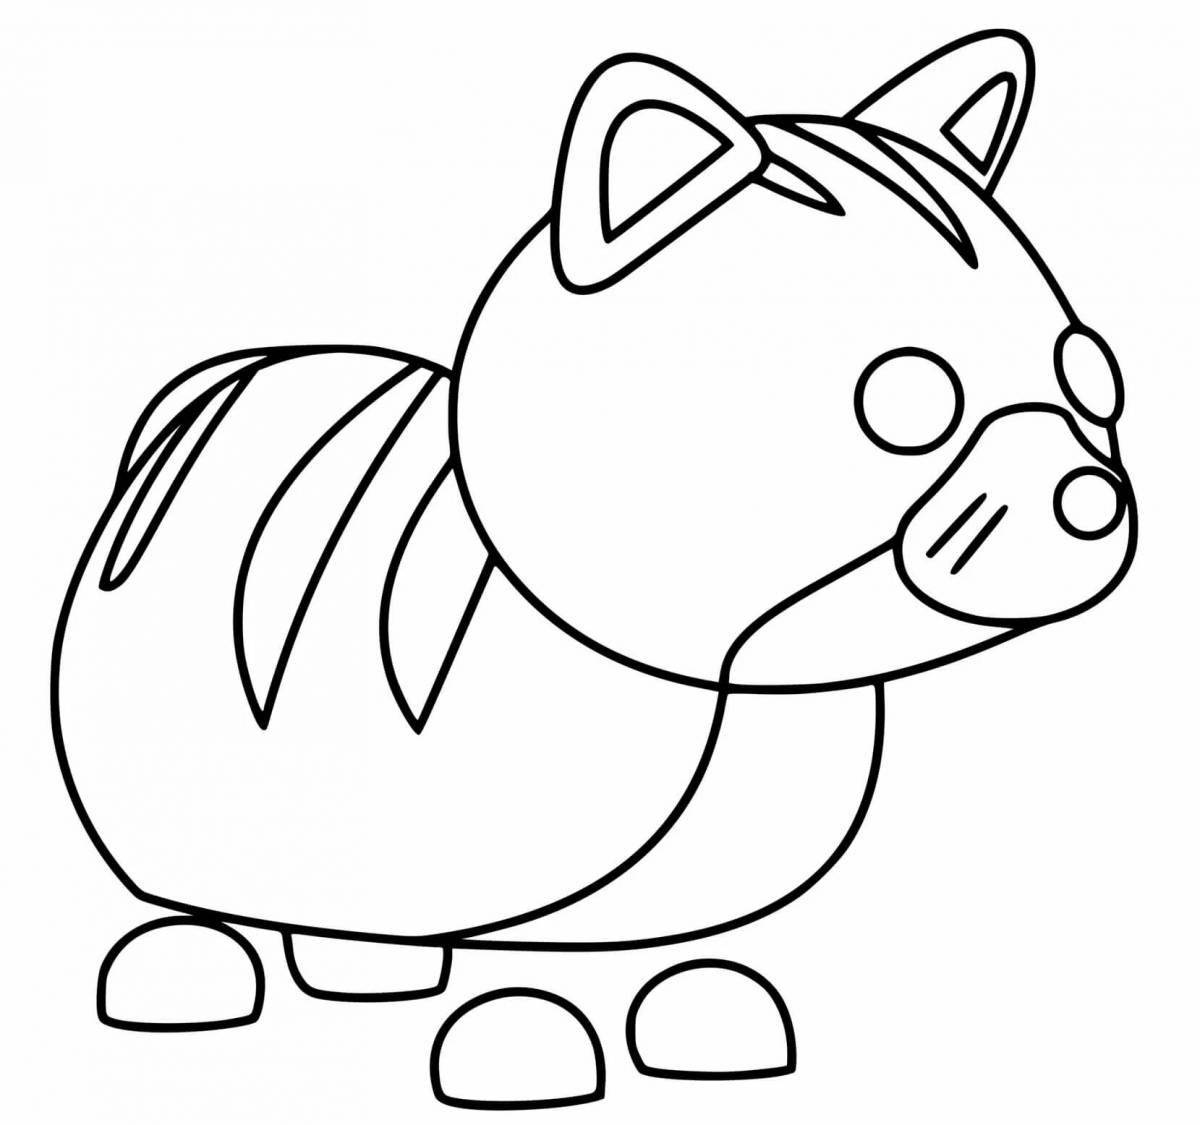 Adopt me pet coloring page live